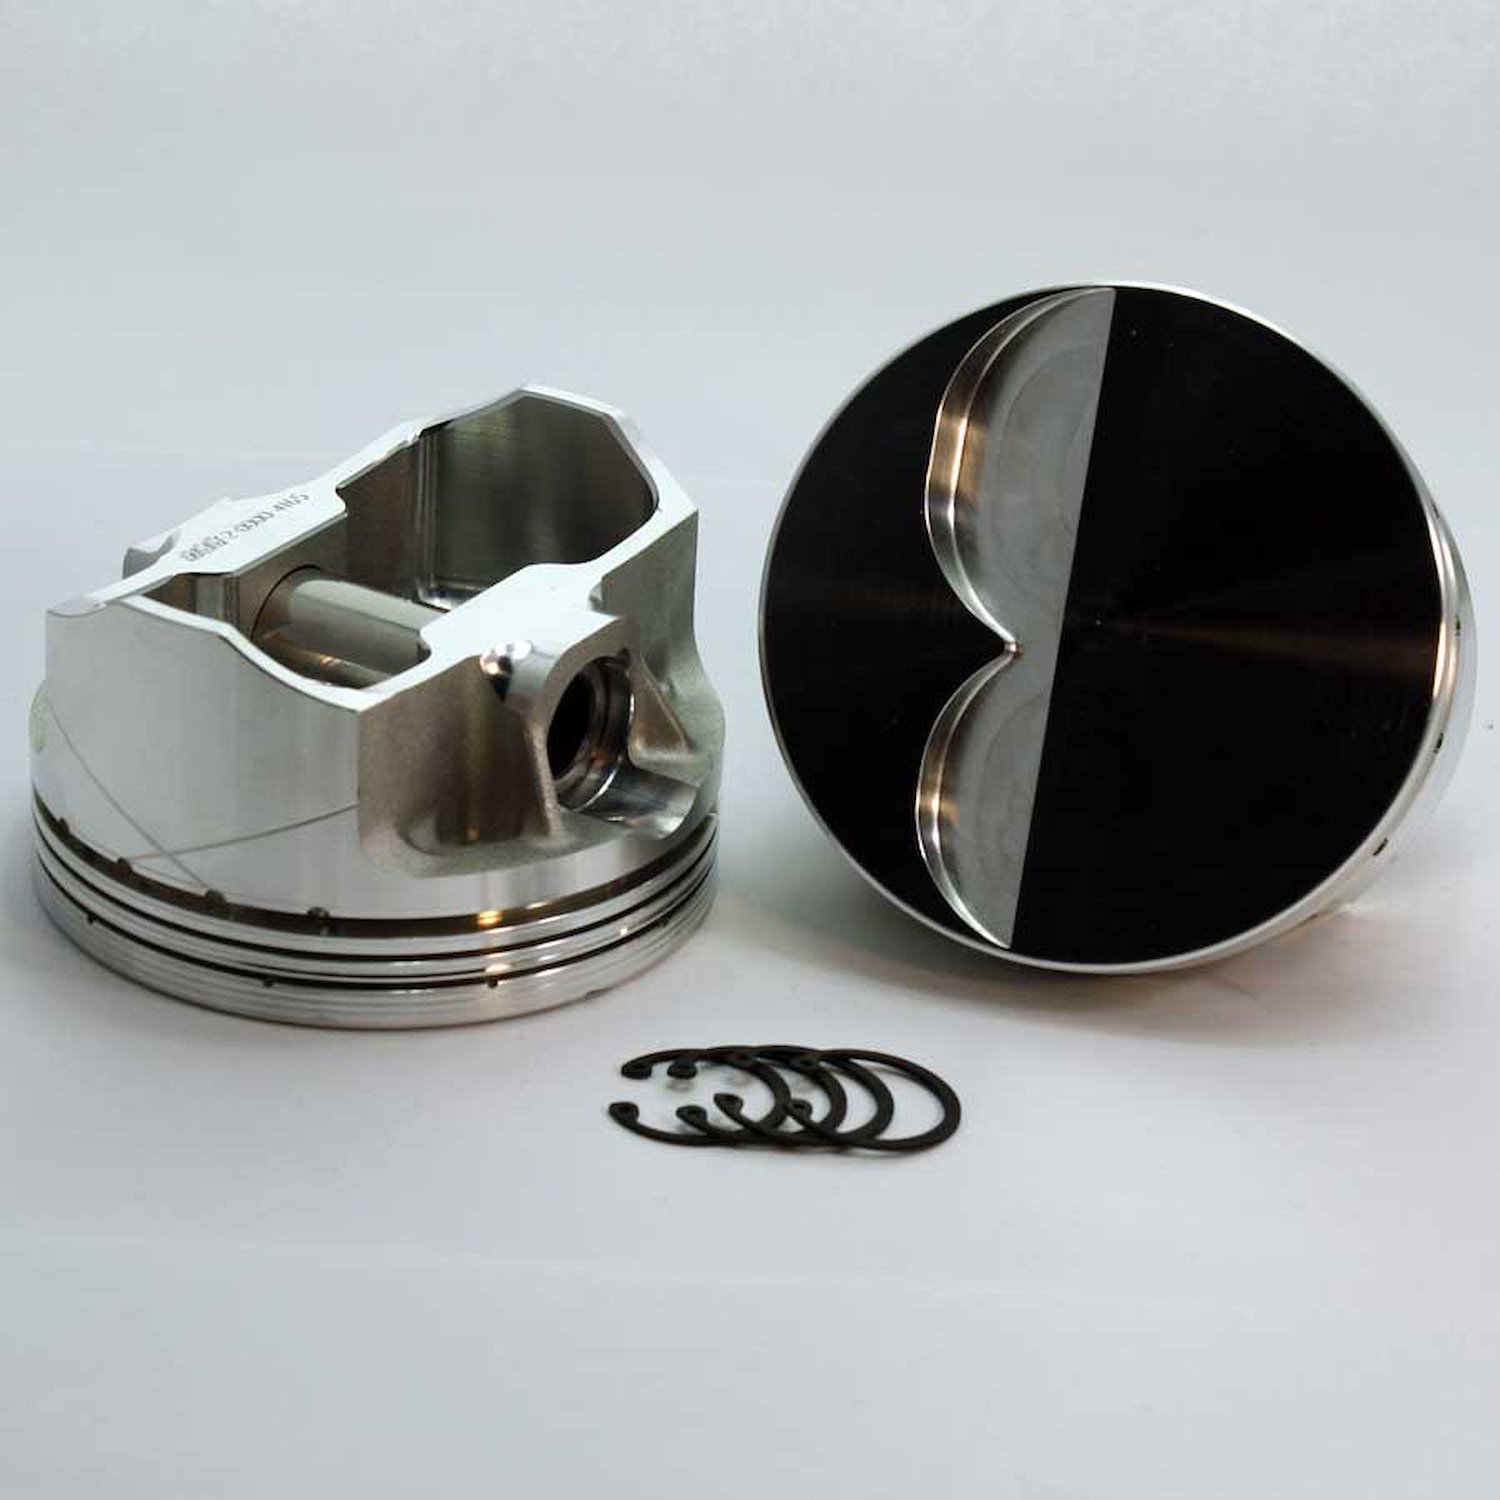 2-3400-4040 FX-Series Flat Top Piston Set for 1962-2001 Small Block Ford 289-302, 4.040 in. Bore, -4cc Volume [OEM Stroke]